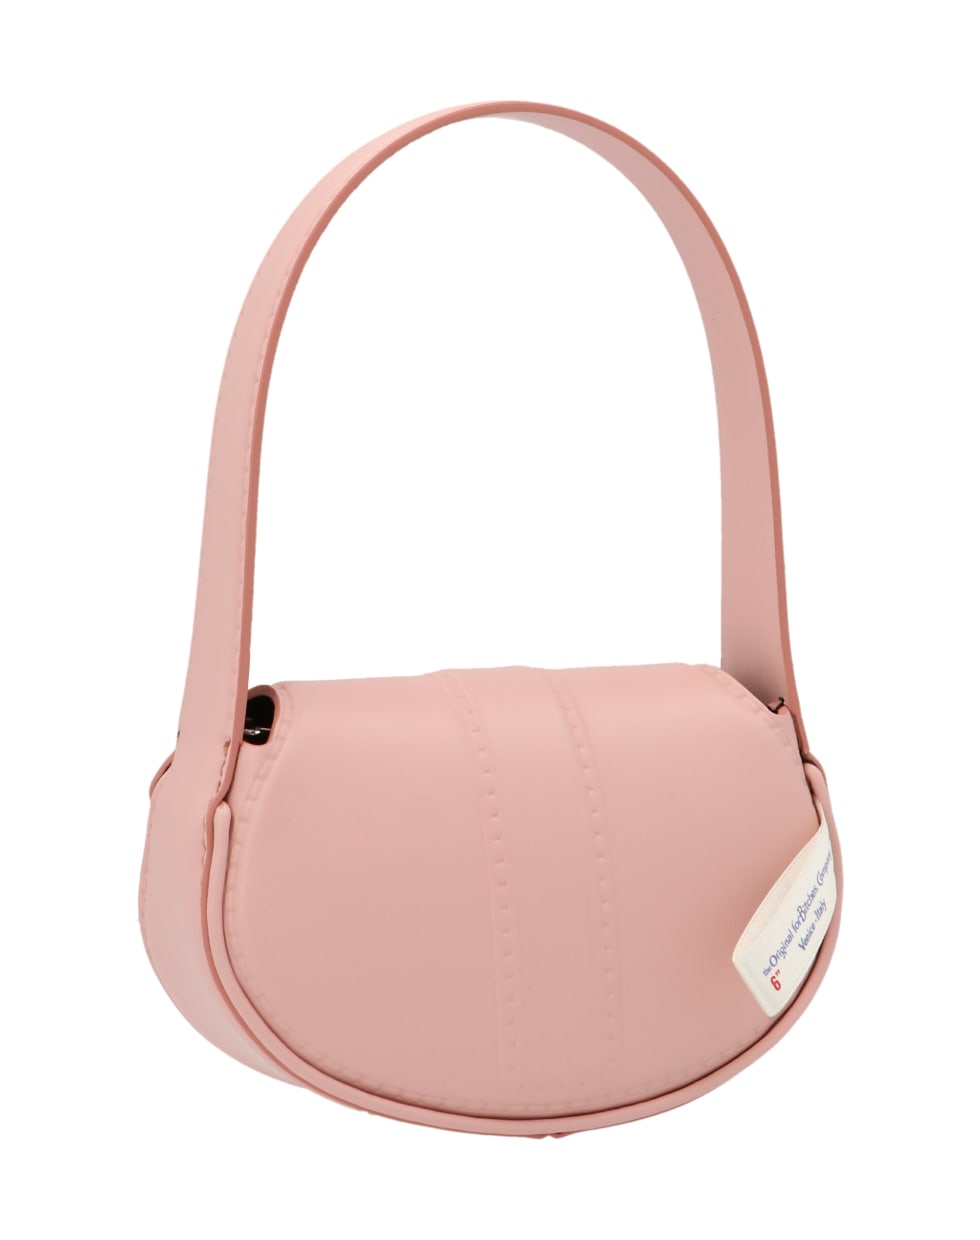 Forbitches 'my Boo 6' Bag - Pink